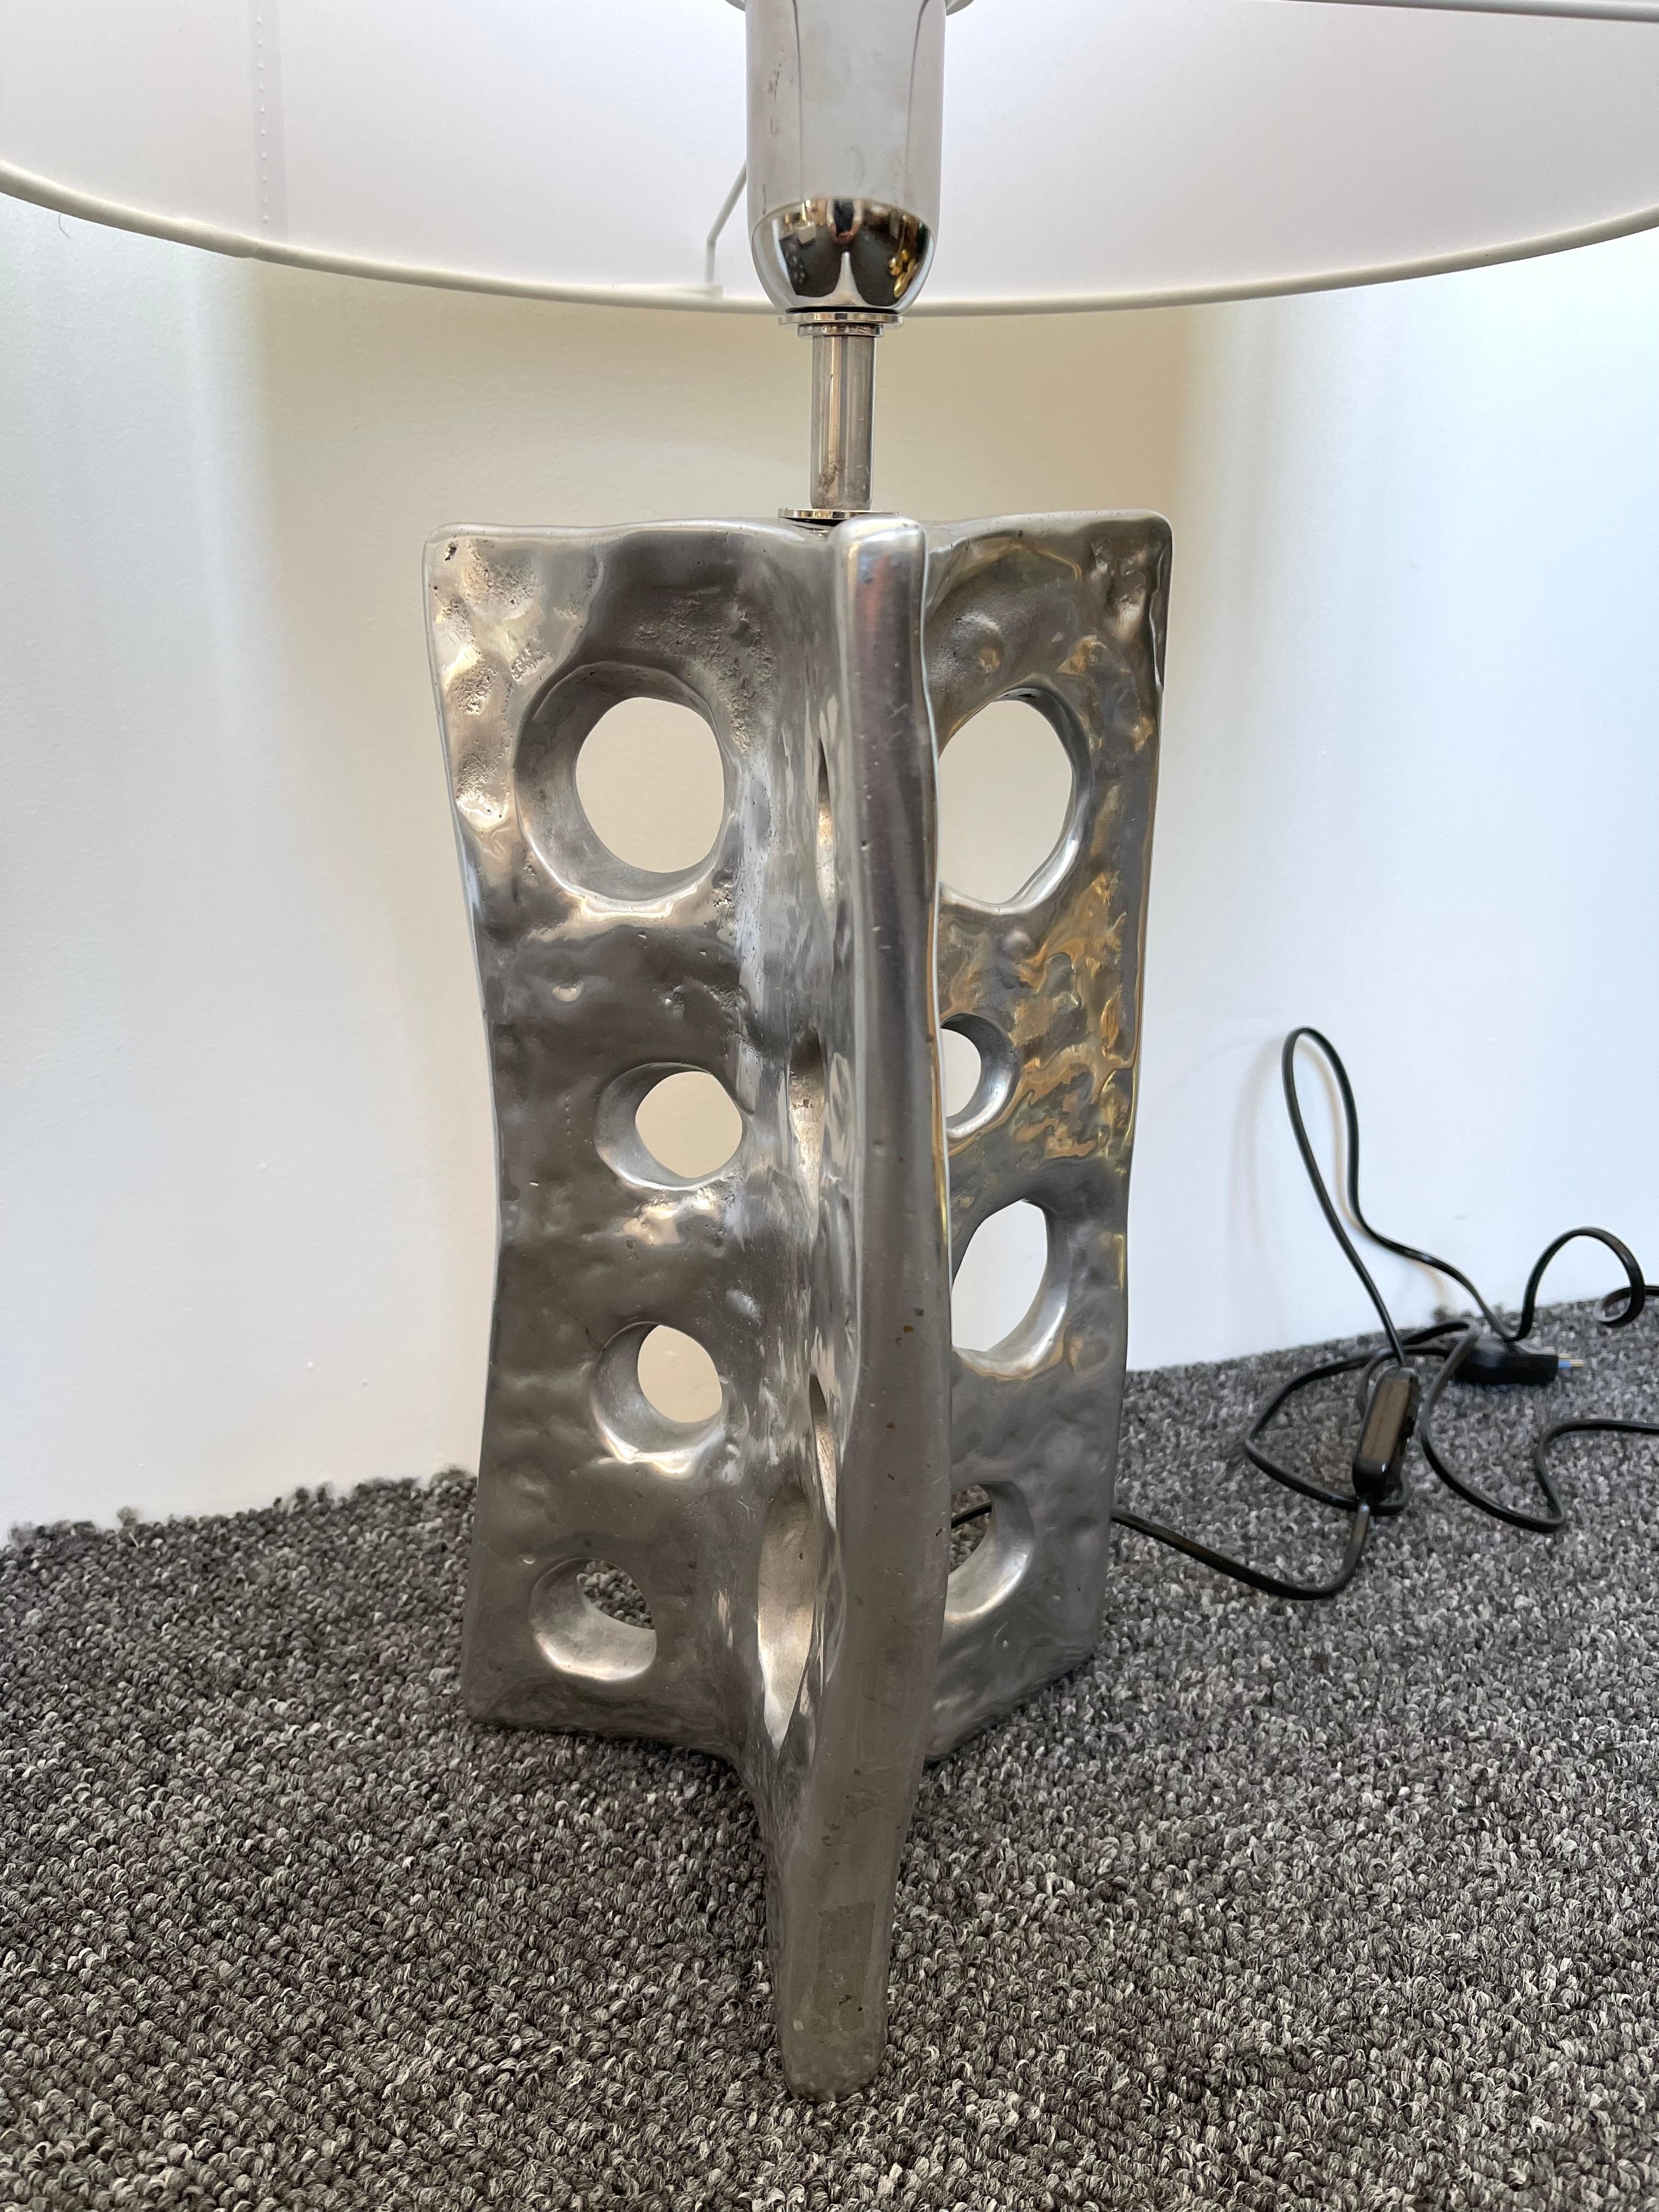 Sculptural pair of table or bedside holey lamps in cast aluminum or silver brass. In the mood of Hervé Van Der Straeten, Garouste & Bonetti, En attendant les Barbares, Franck Evenou, Fondica, Hubert Le Gall.

Demo shades are non included.